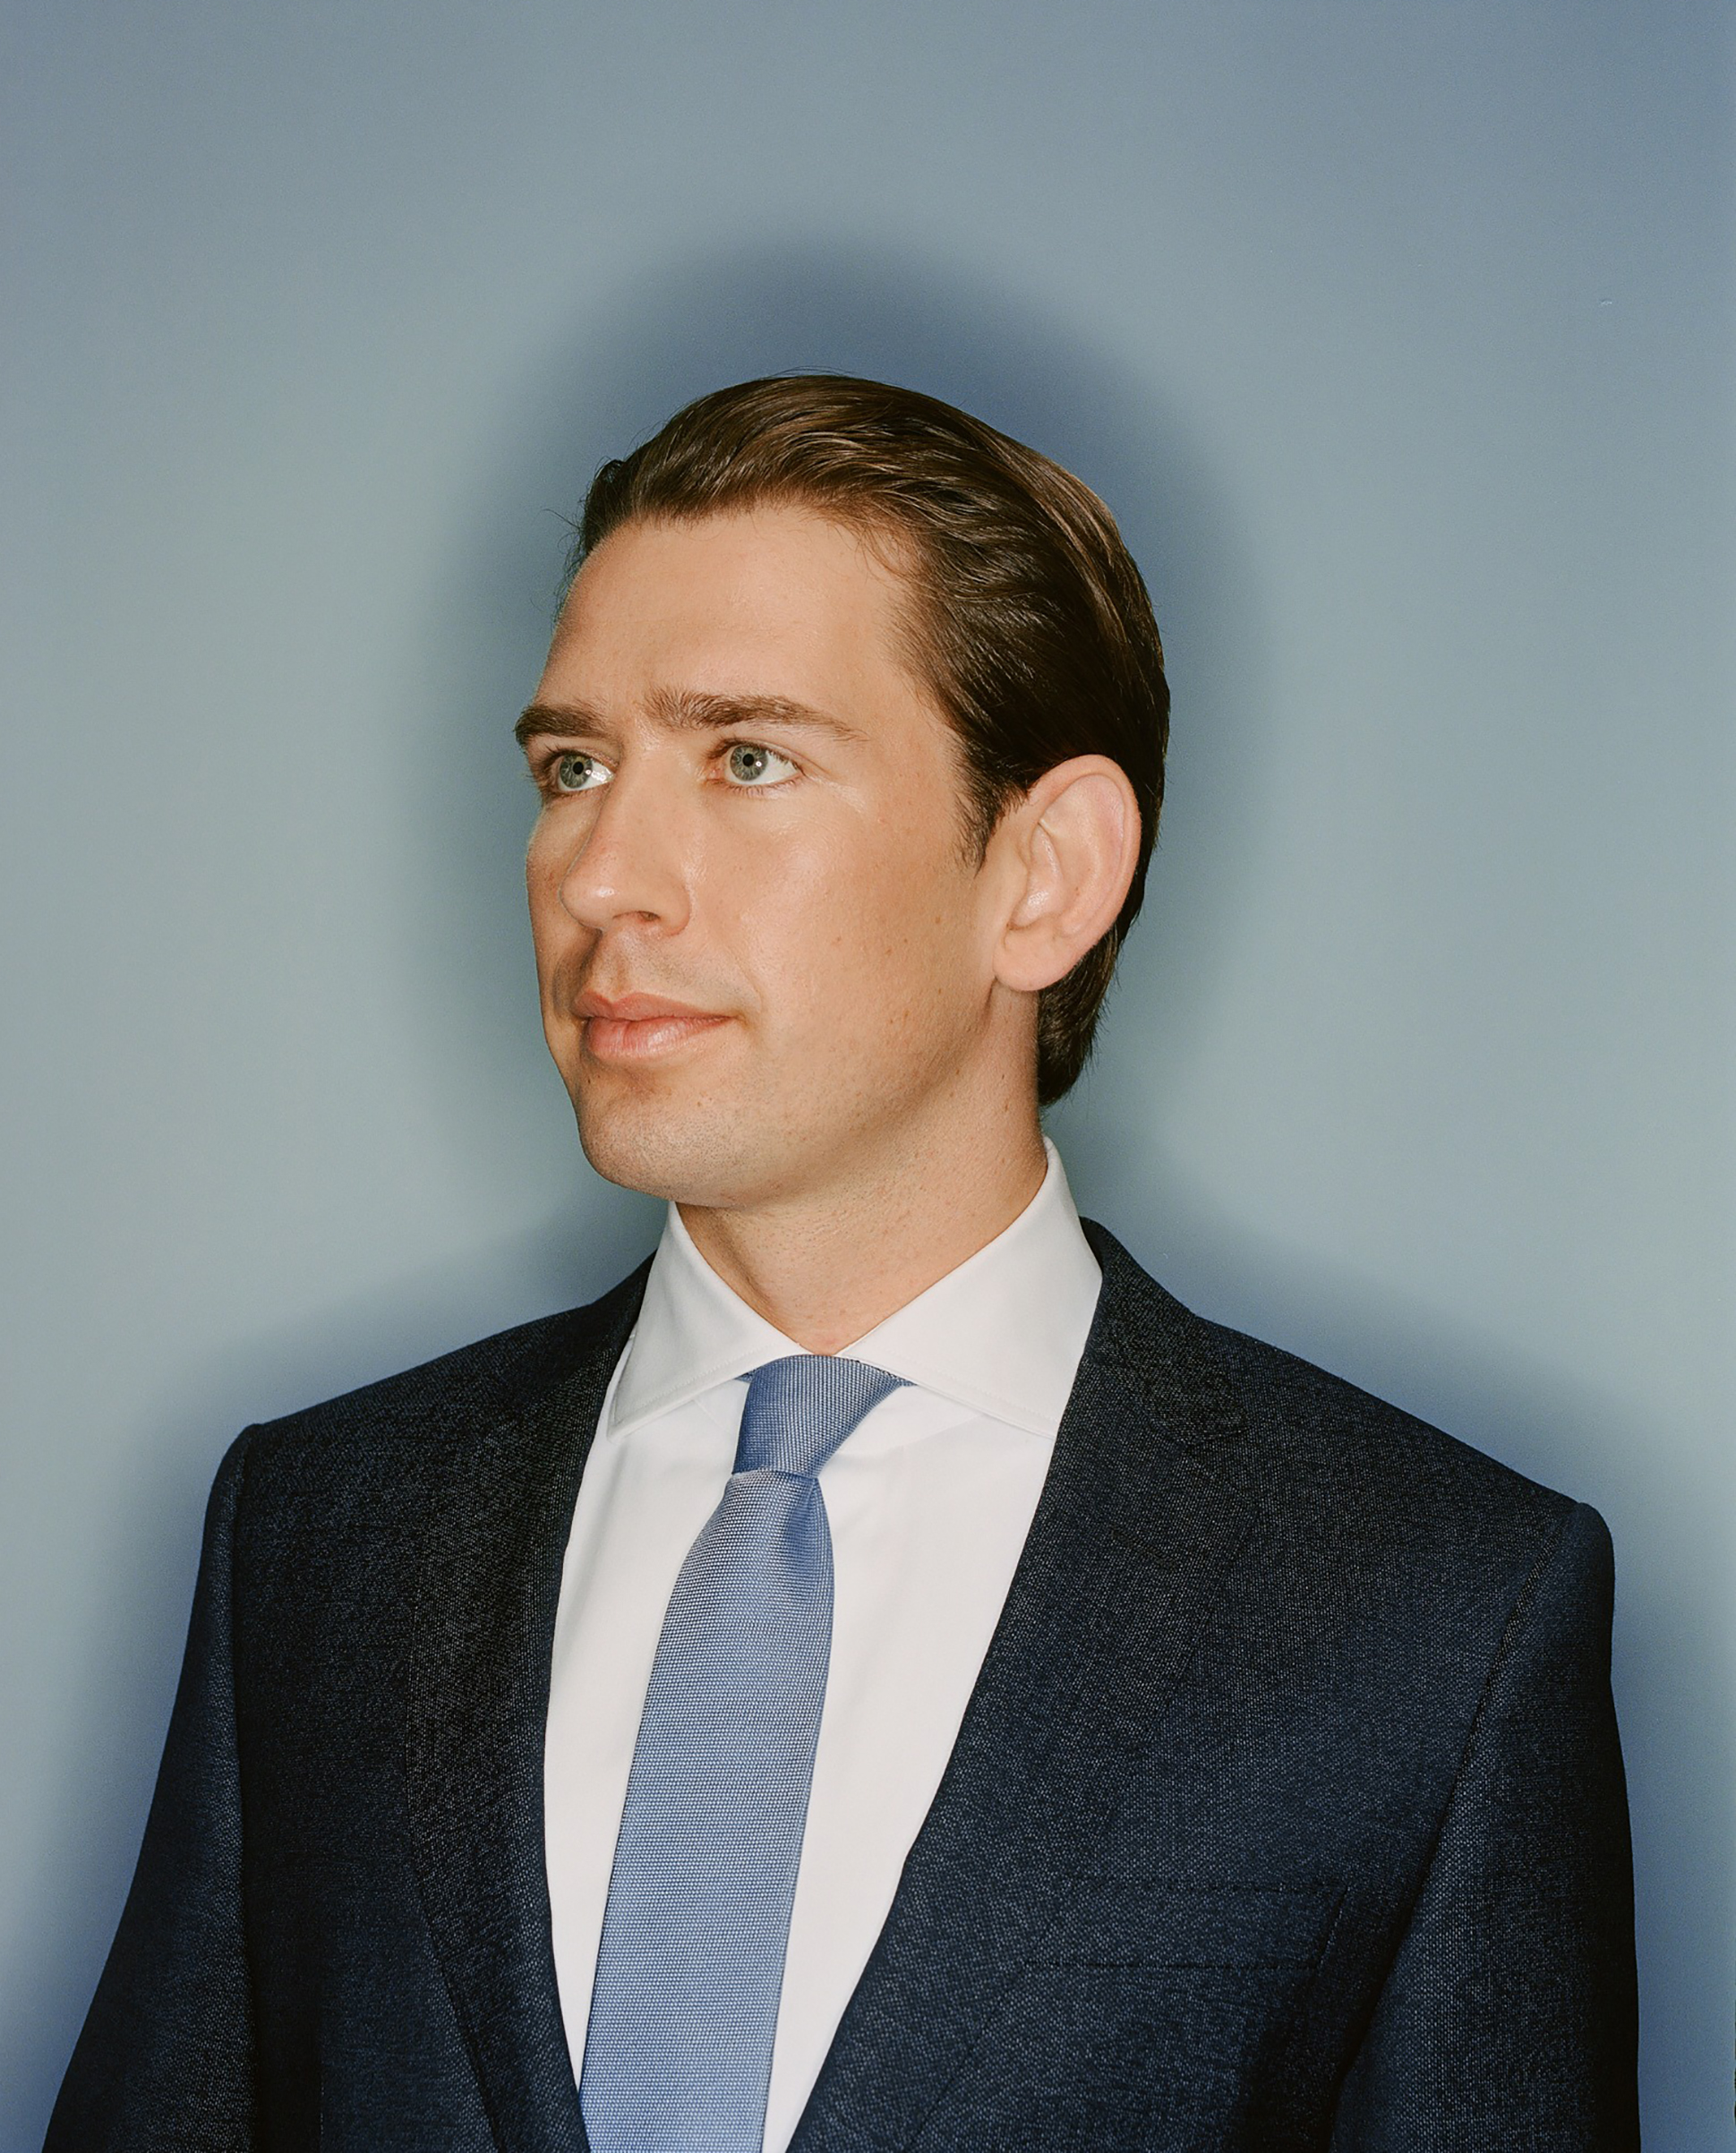 At 32, Kurz, photographed in October, is the youngest Chancellor in Austrian history (Mark Peckmezian for Time)